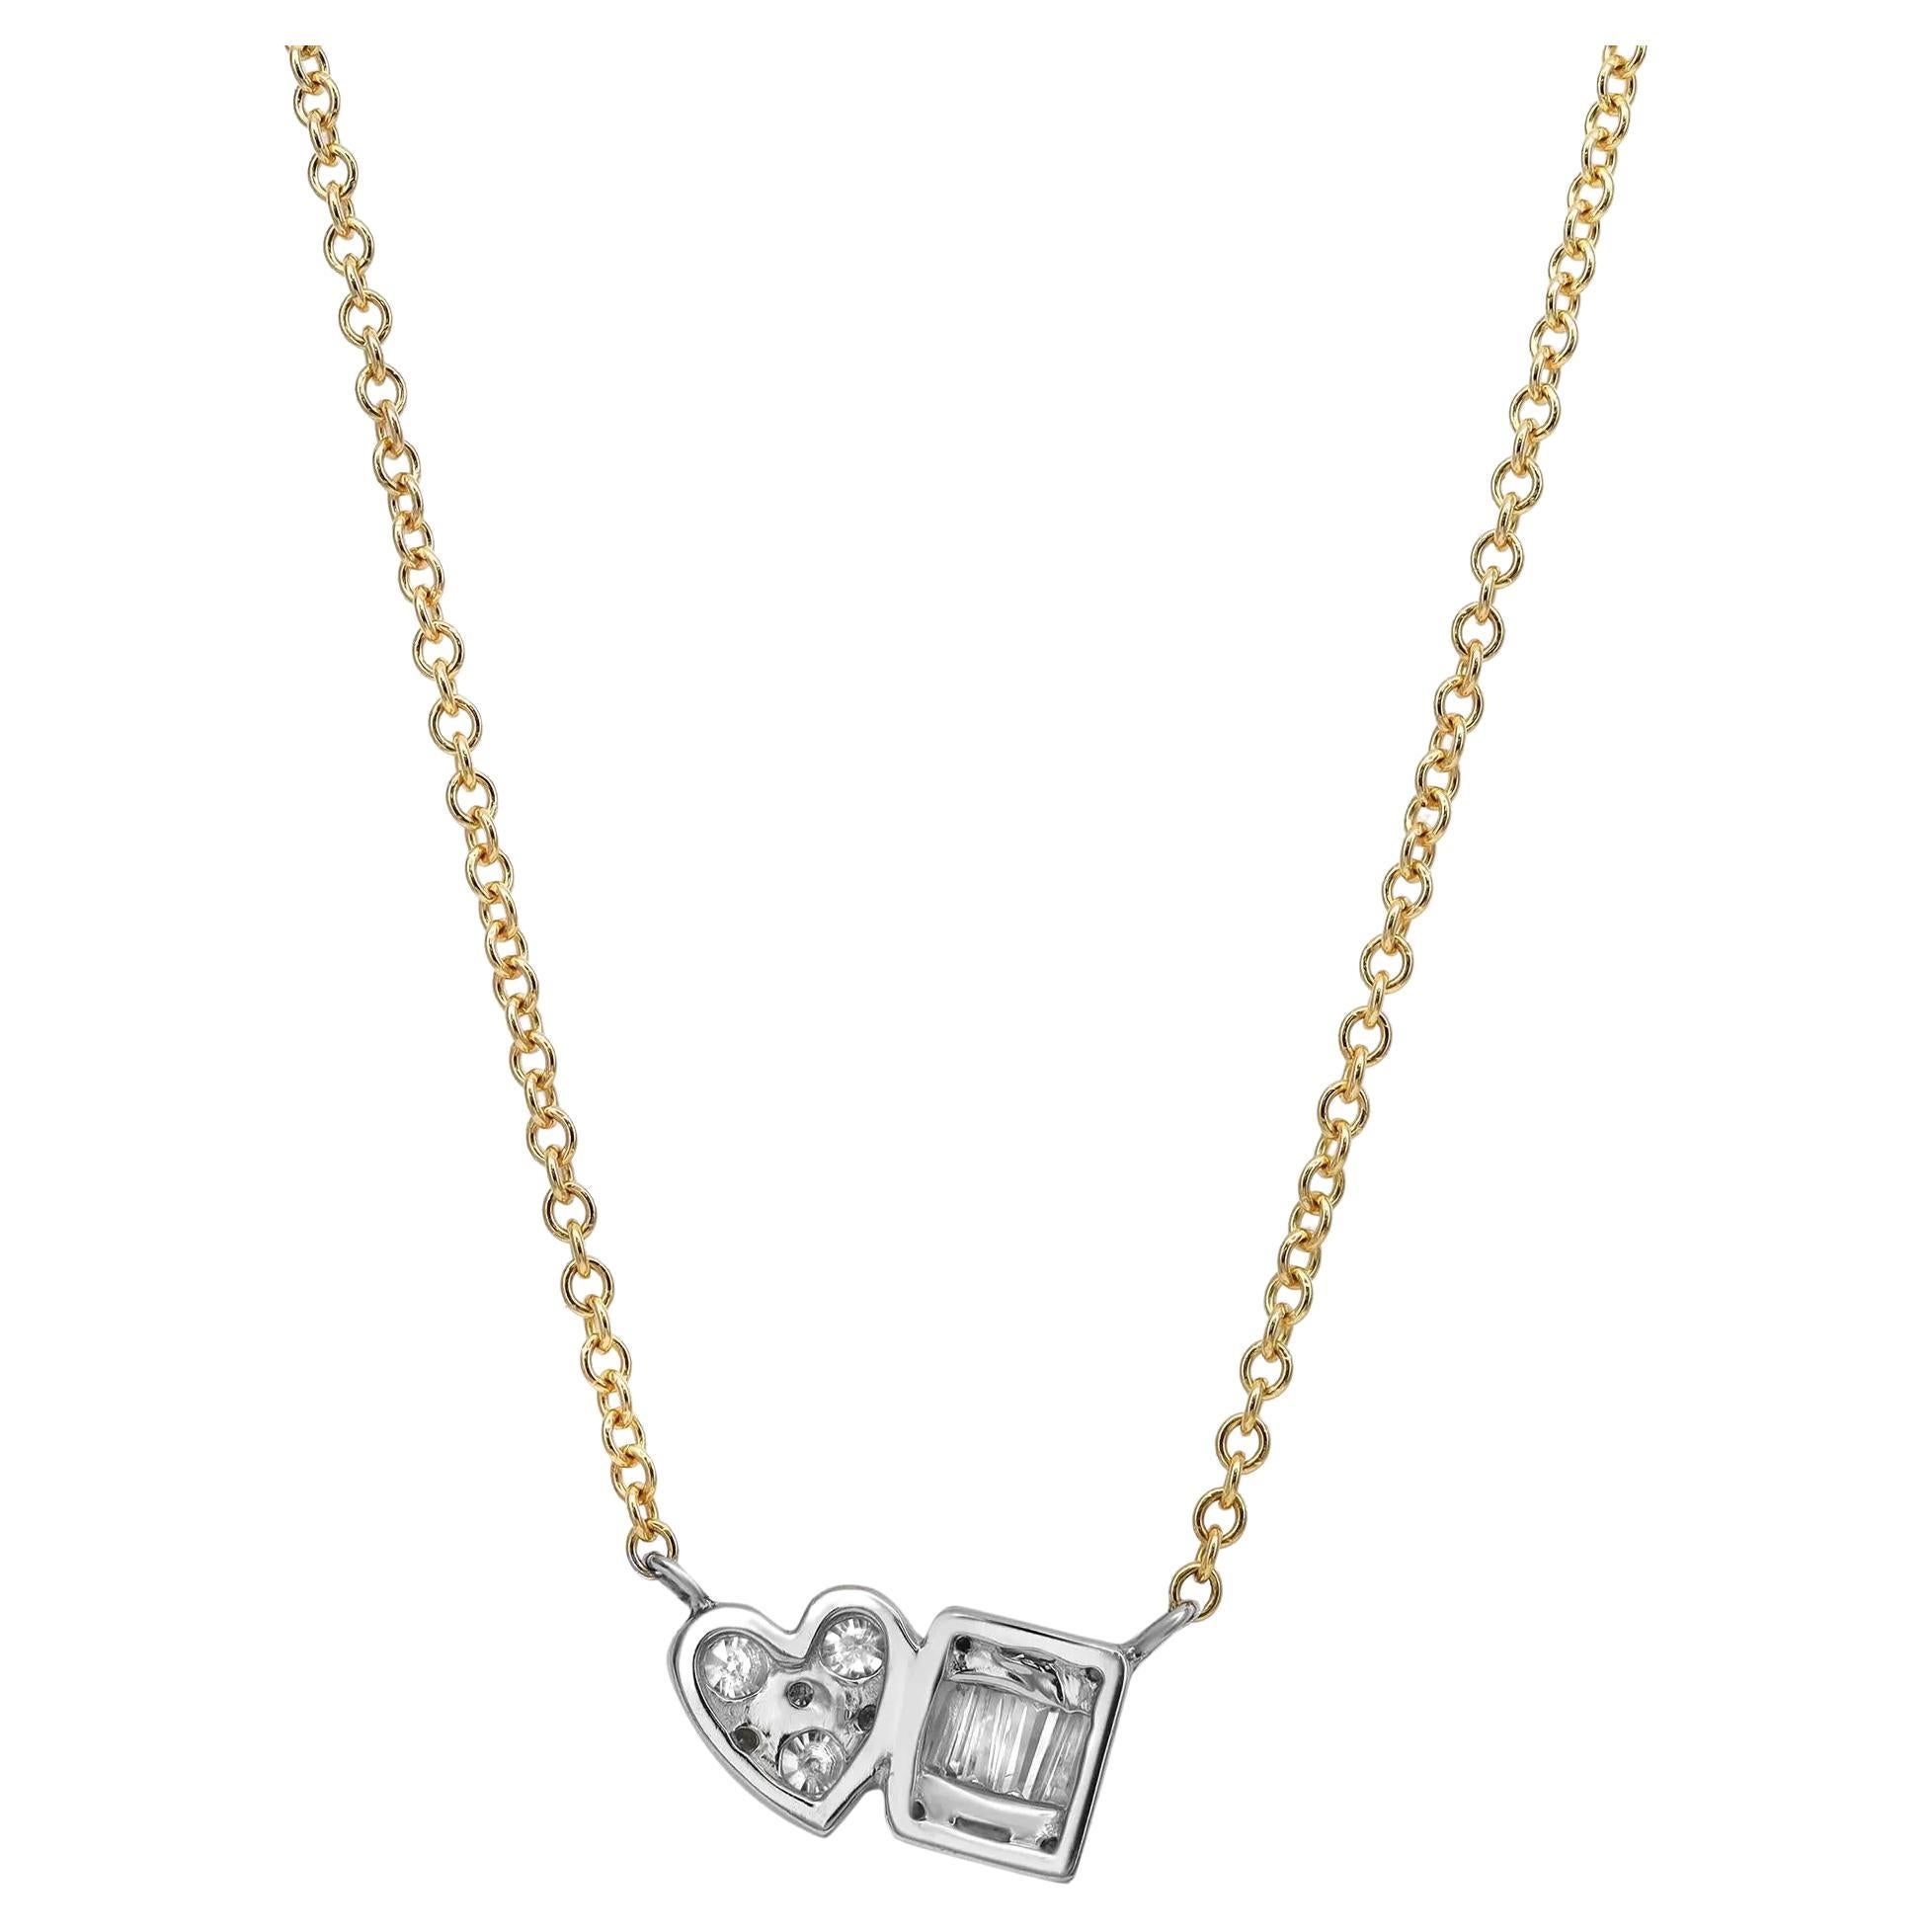 Modern Baguette And Round Cut Diamond Pendant Necklace 14K Yellow Gold 0.45Cttw For Sale